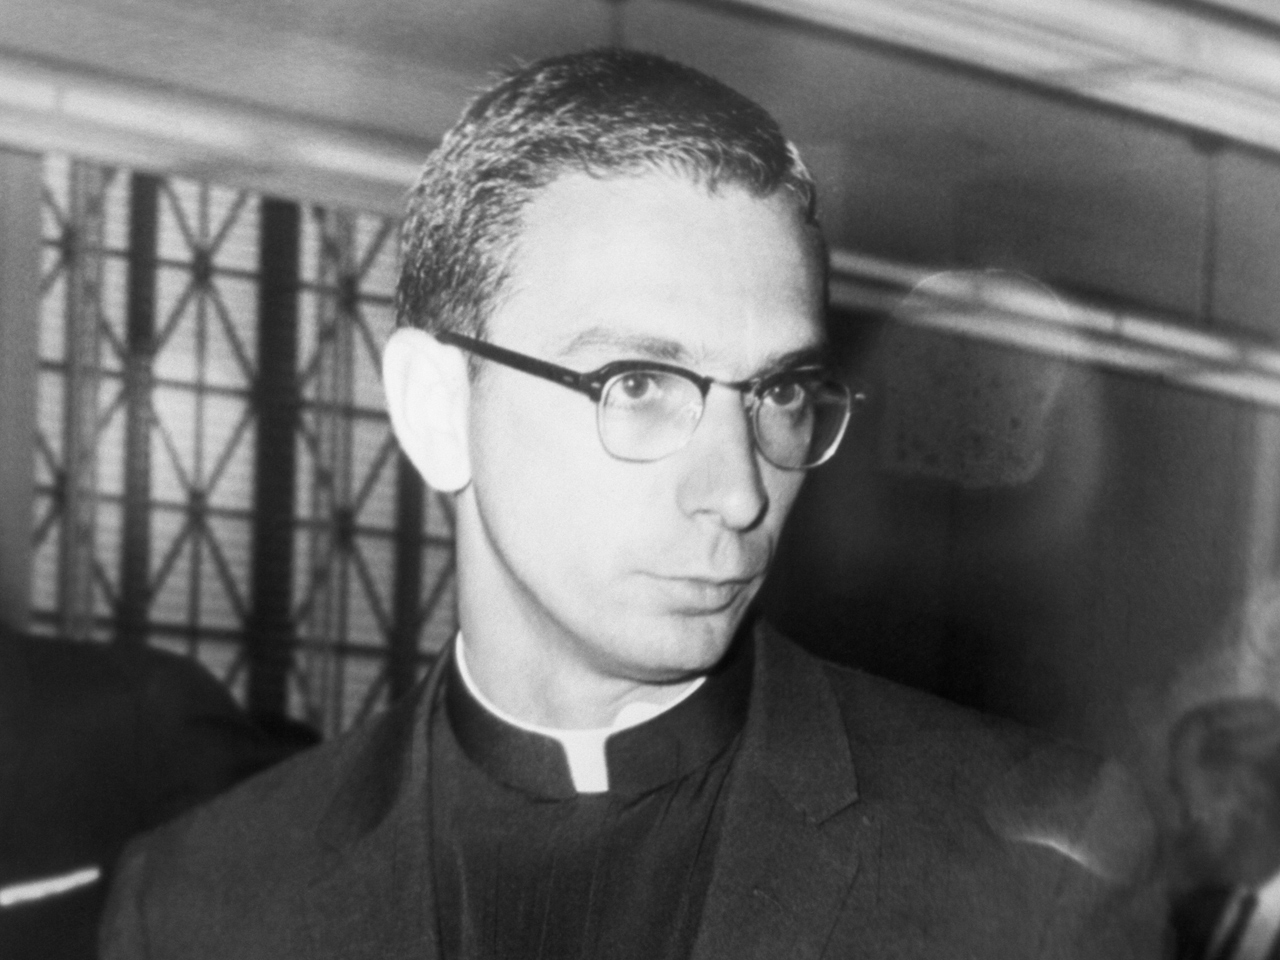 As few details are released, fatal stabbing of Catholic priest